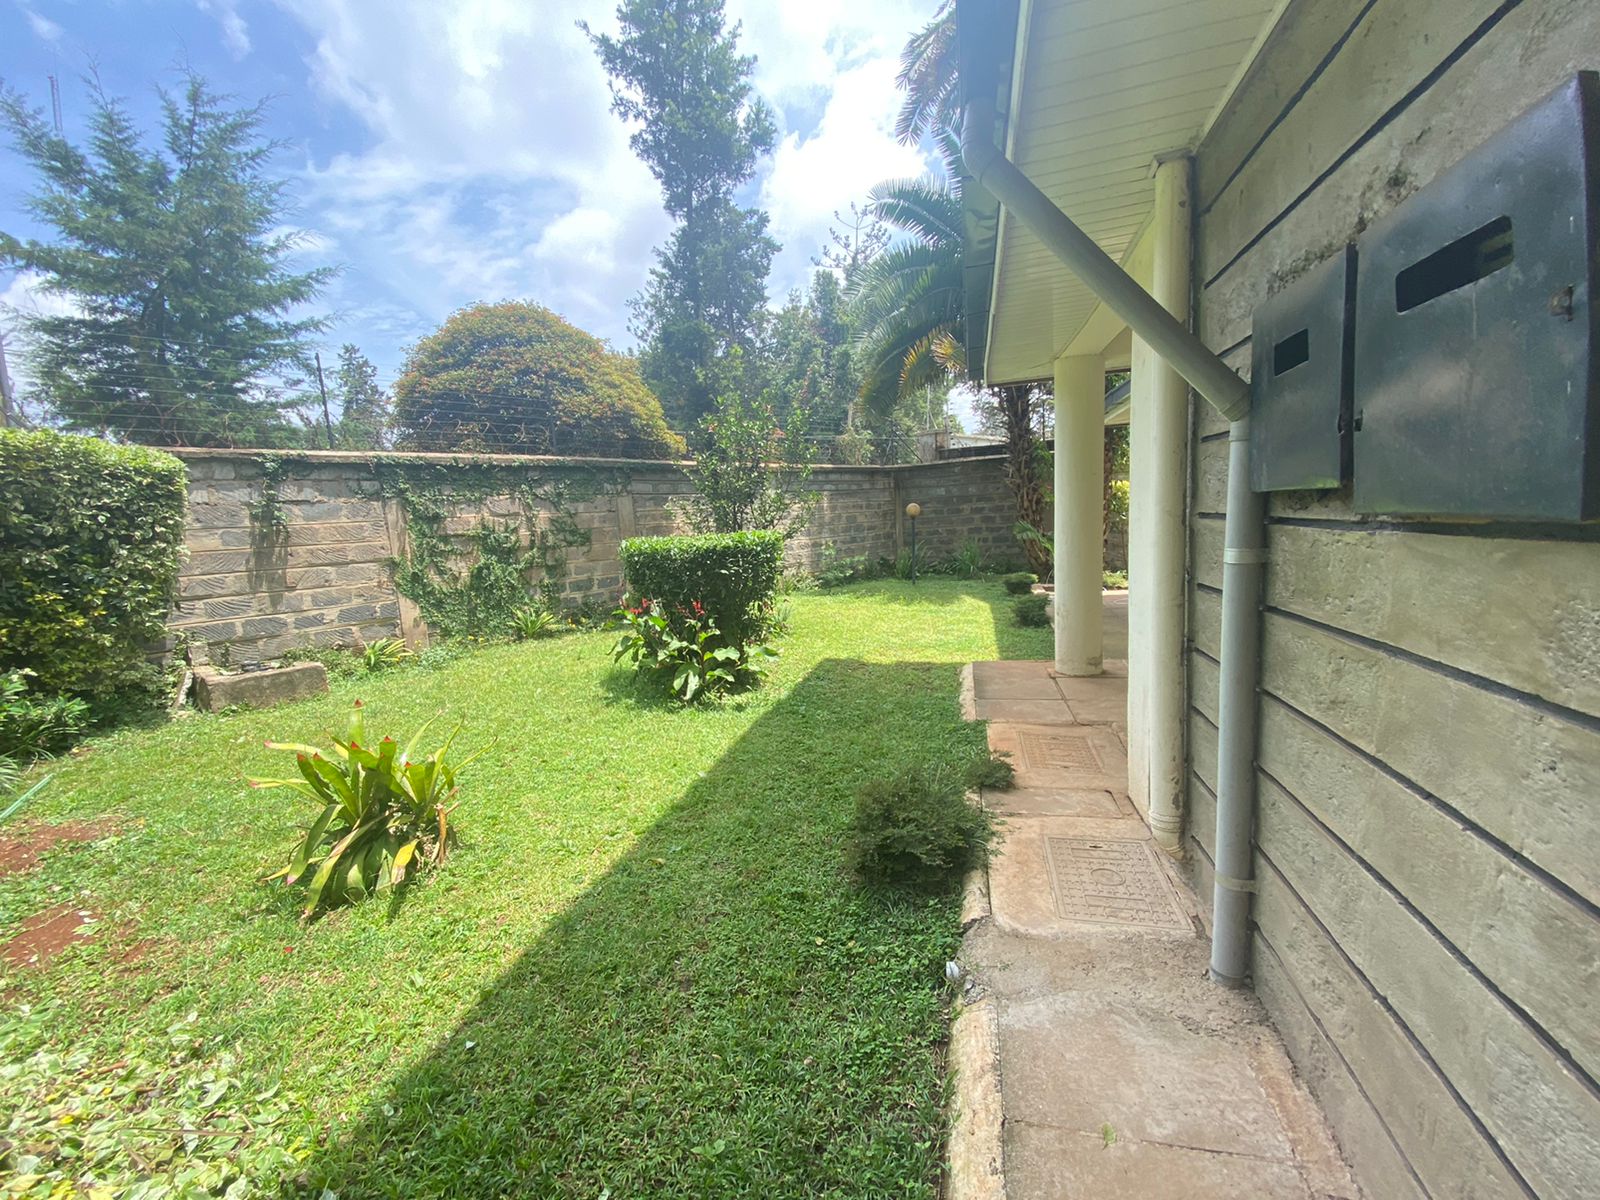 5 bedroom House in lavington all ensuite plus dsq for Sale at Ksh47m Negotiable (4)